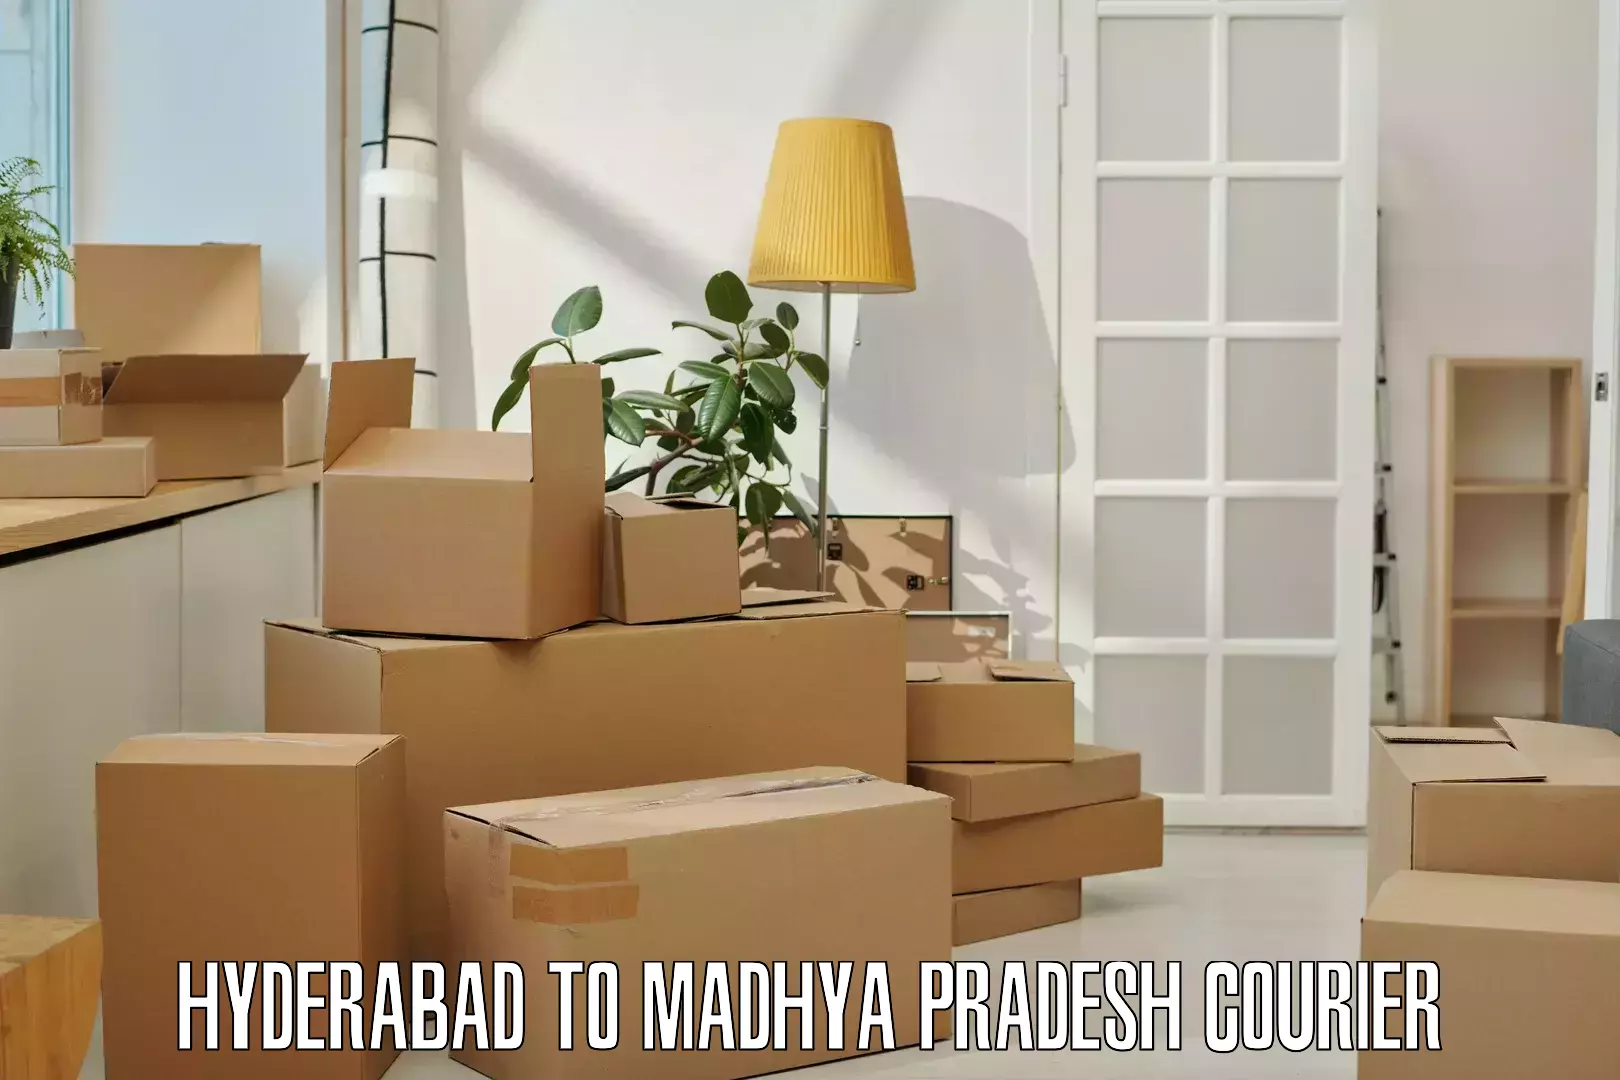 Customer-focused courier in Hyderabad to Silwani